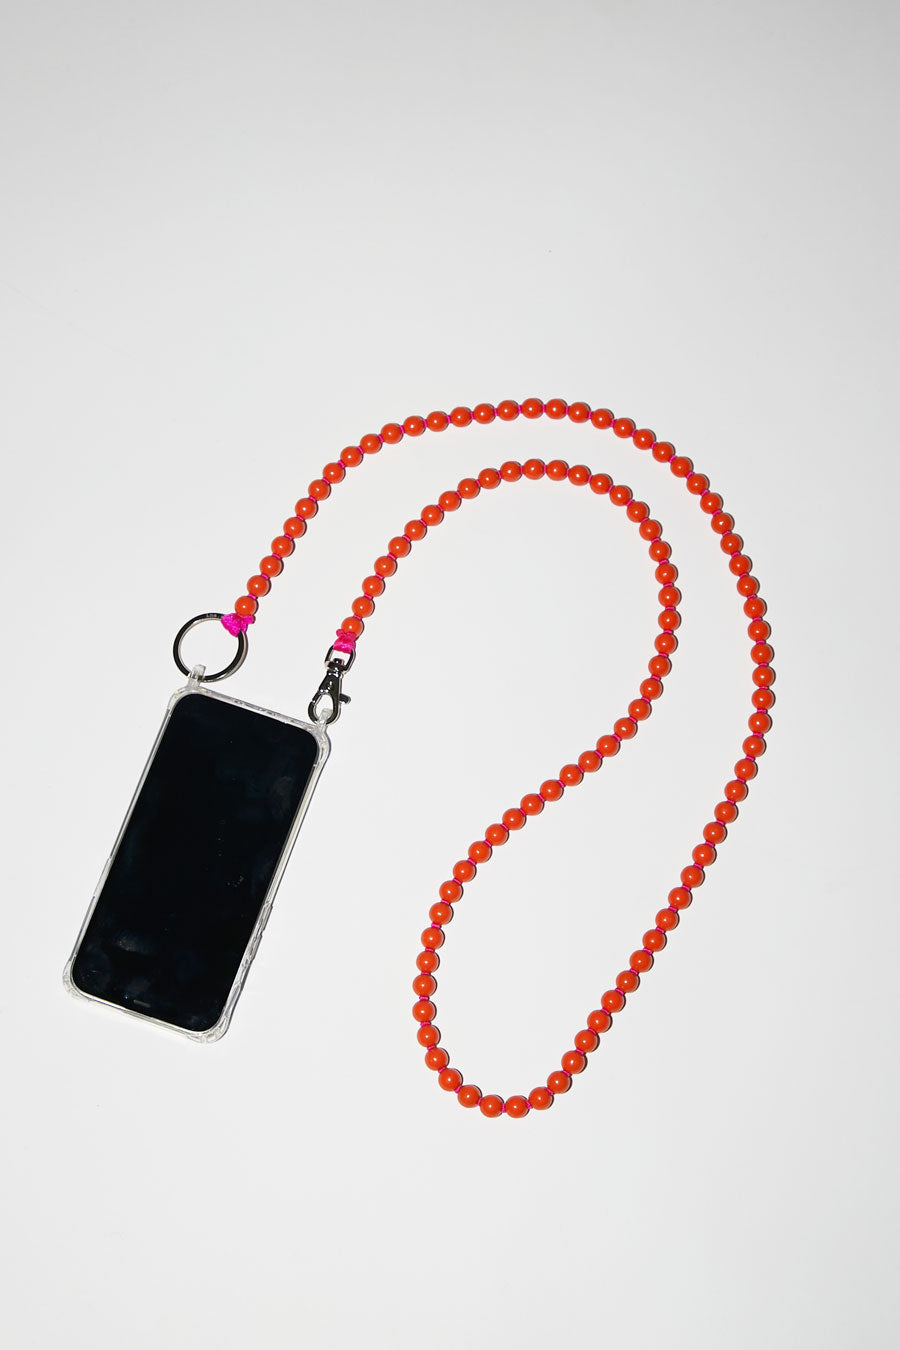 Ina Seifart Handykette Iphone Necklace in Orange with Pink Thread